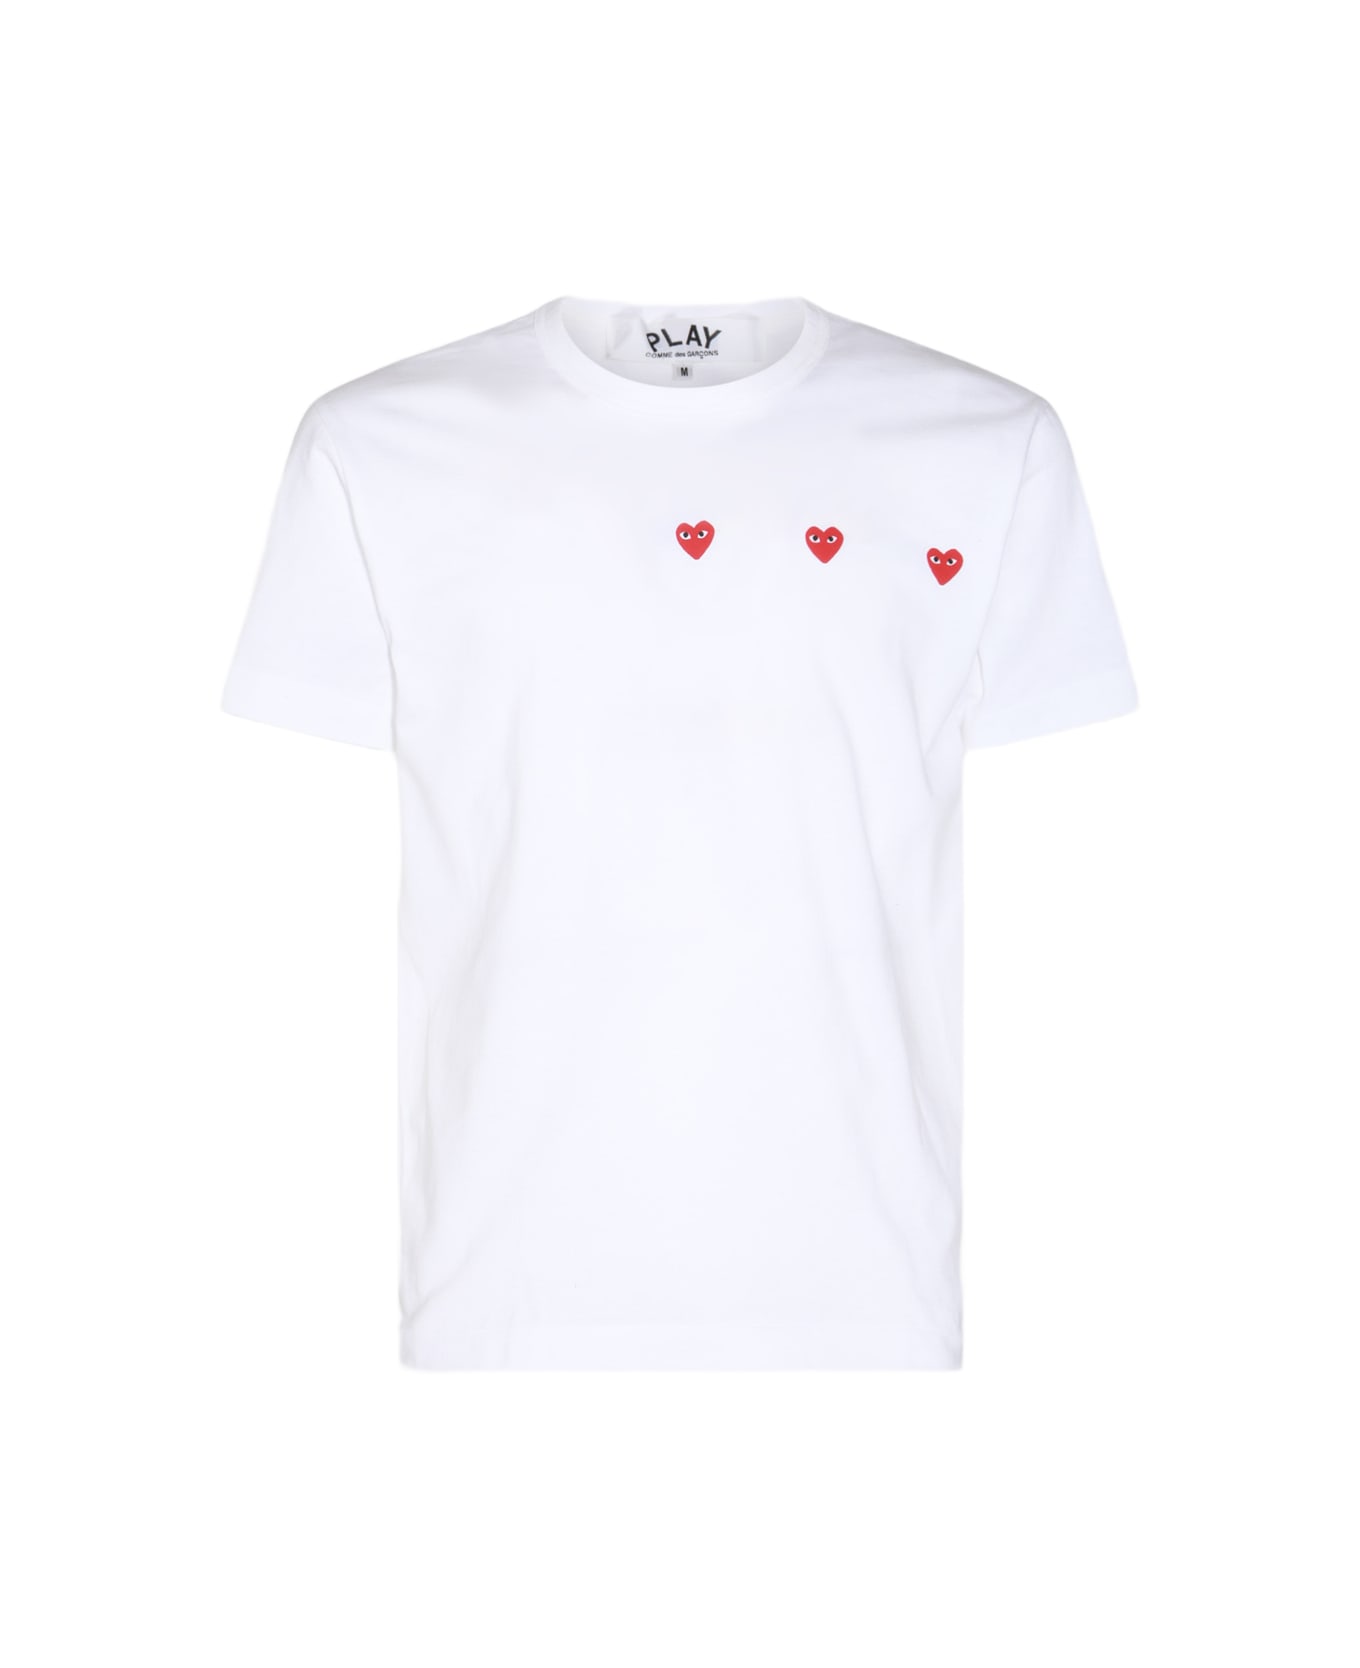 Comme des Garçons Play White And Red Cotton Play T-shirt - White